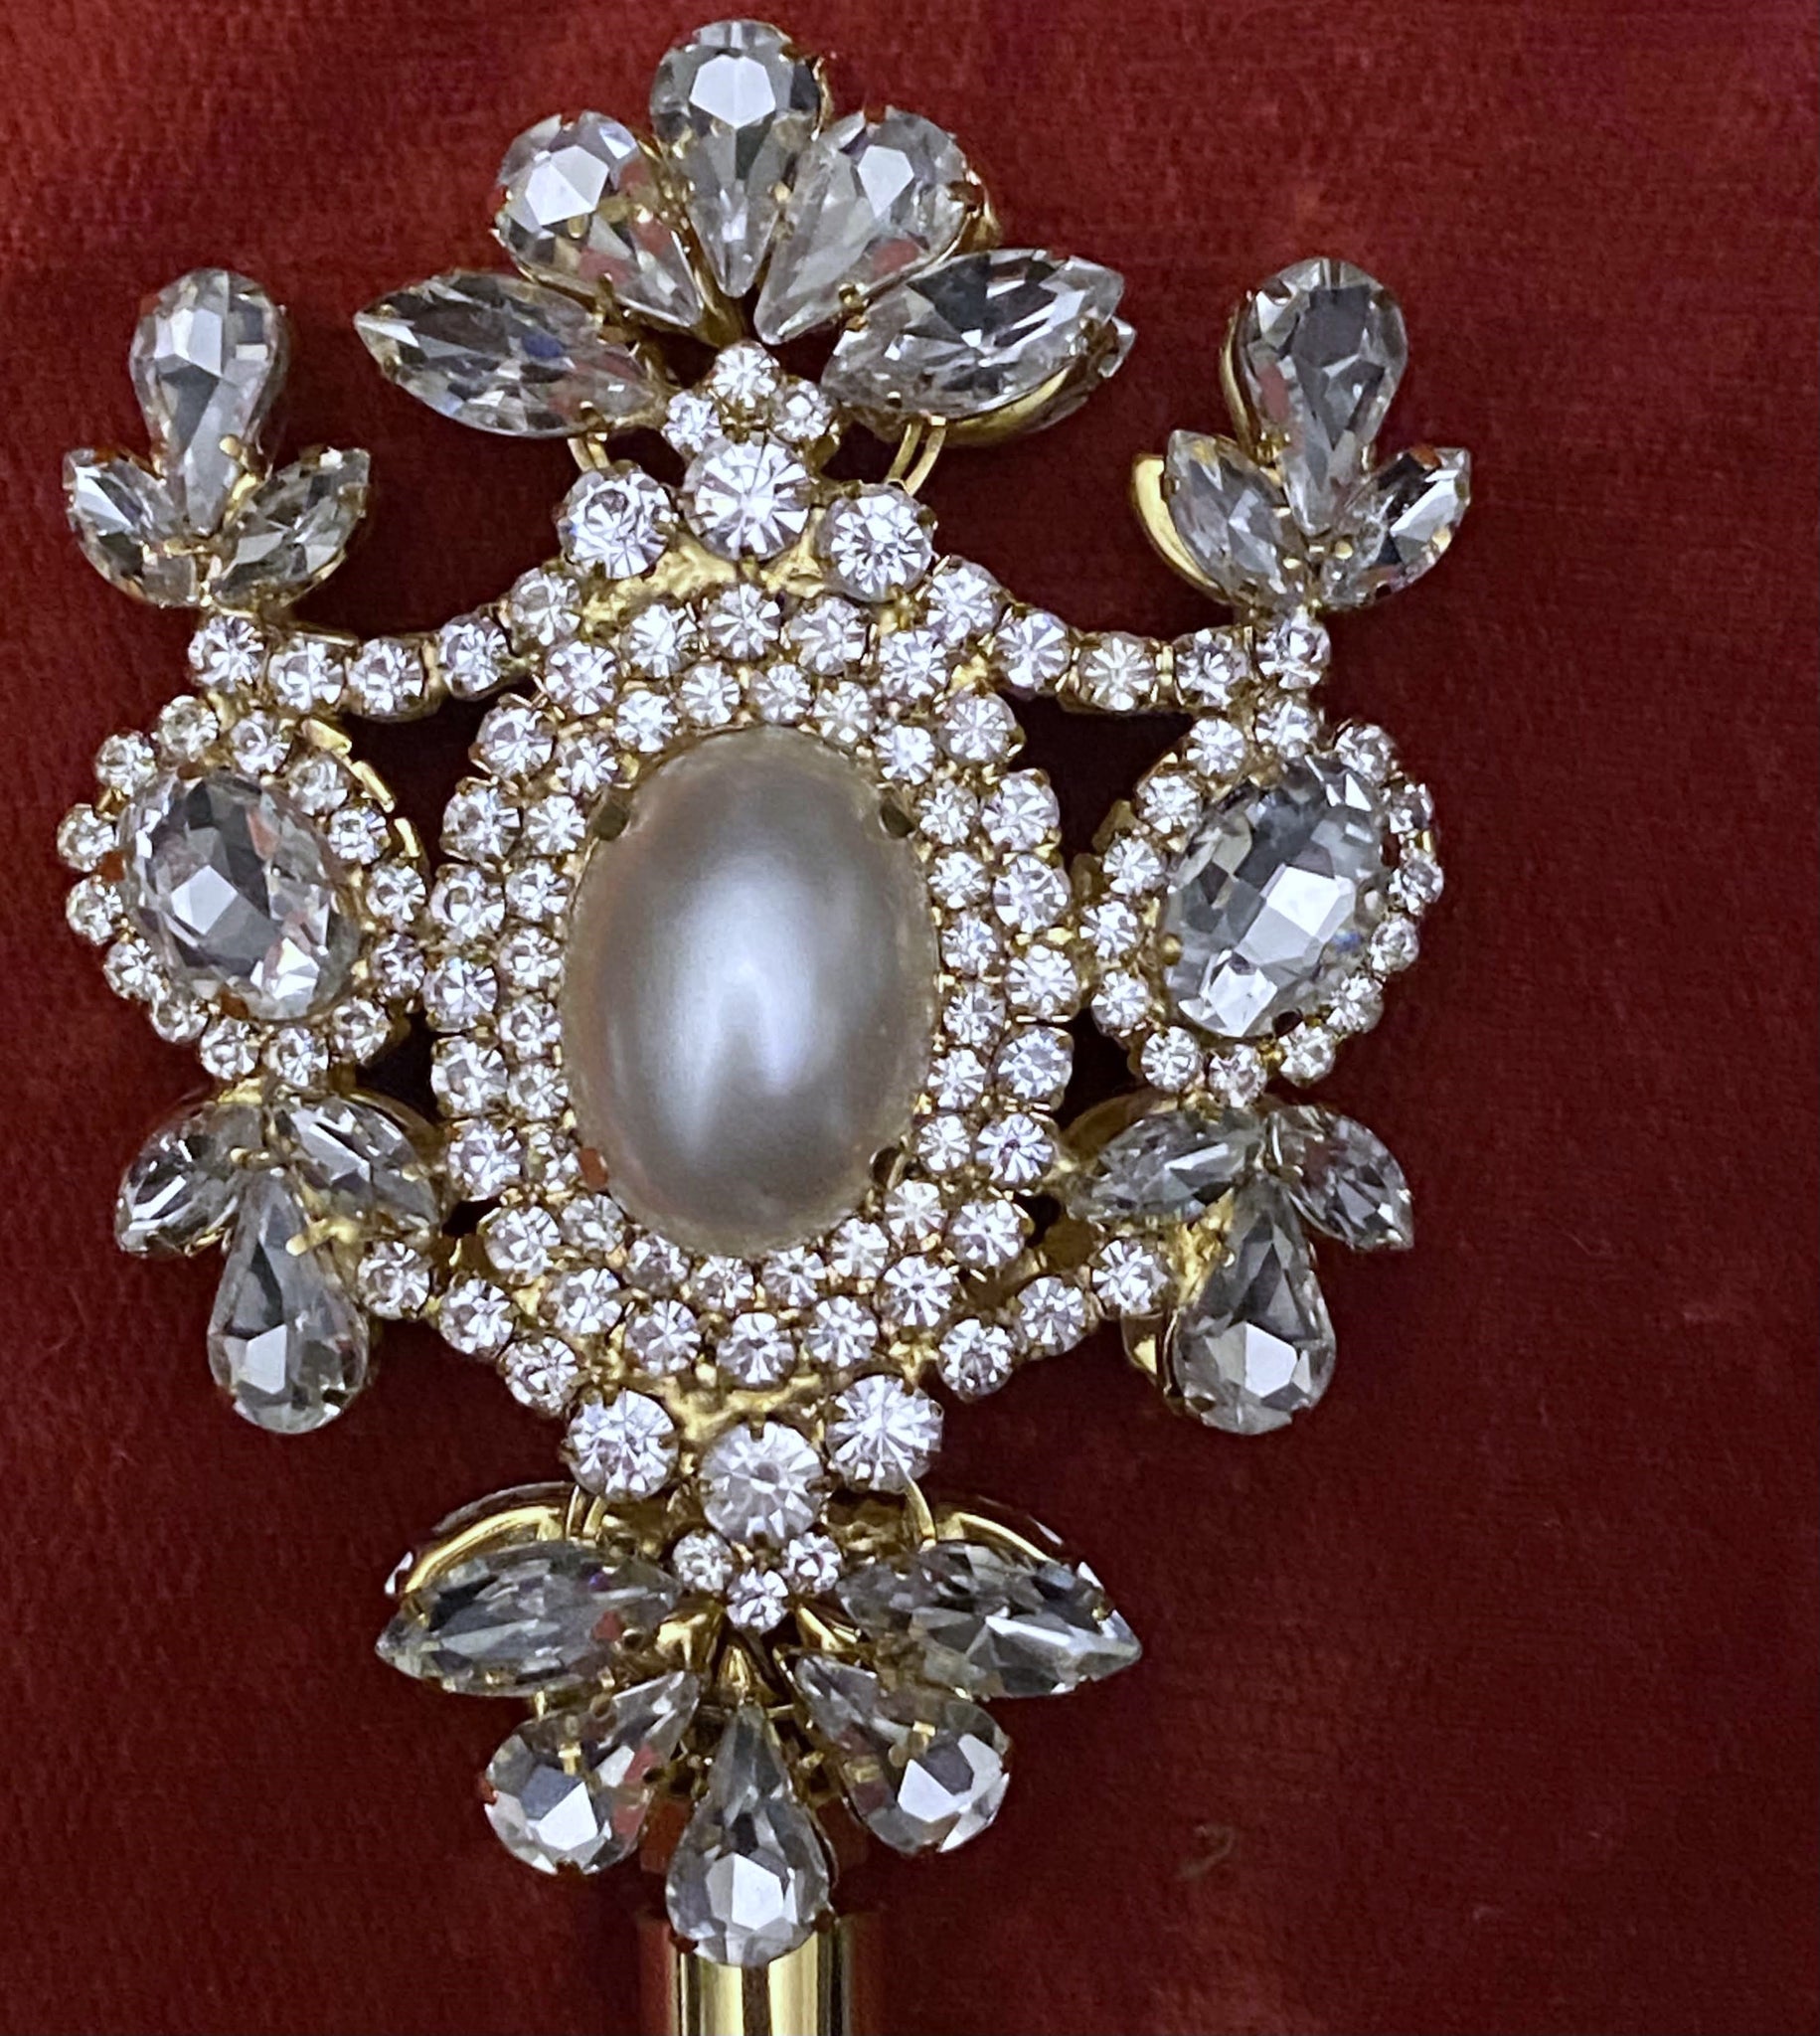 Russian Imperial  Dynasty Palace Gold  Pearl Rhinestone Scepter